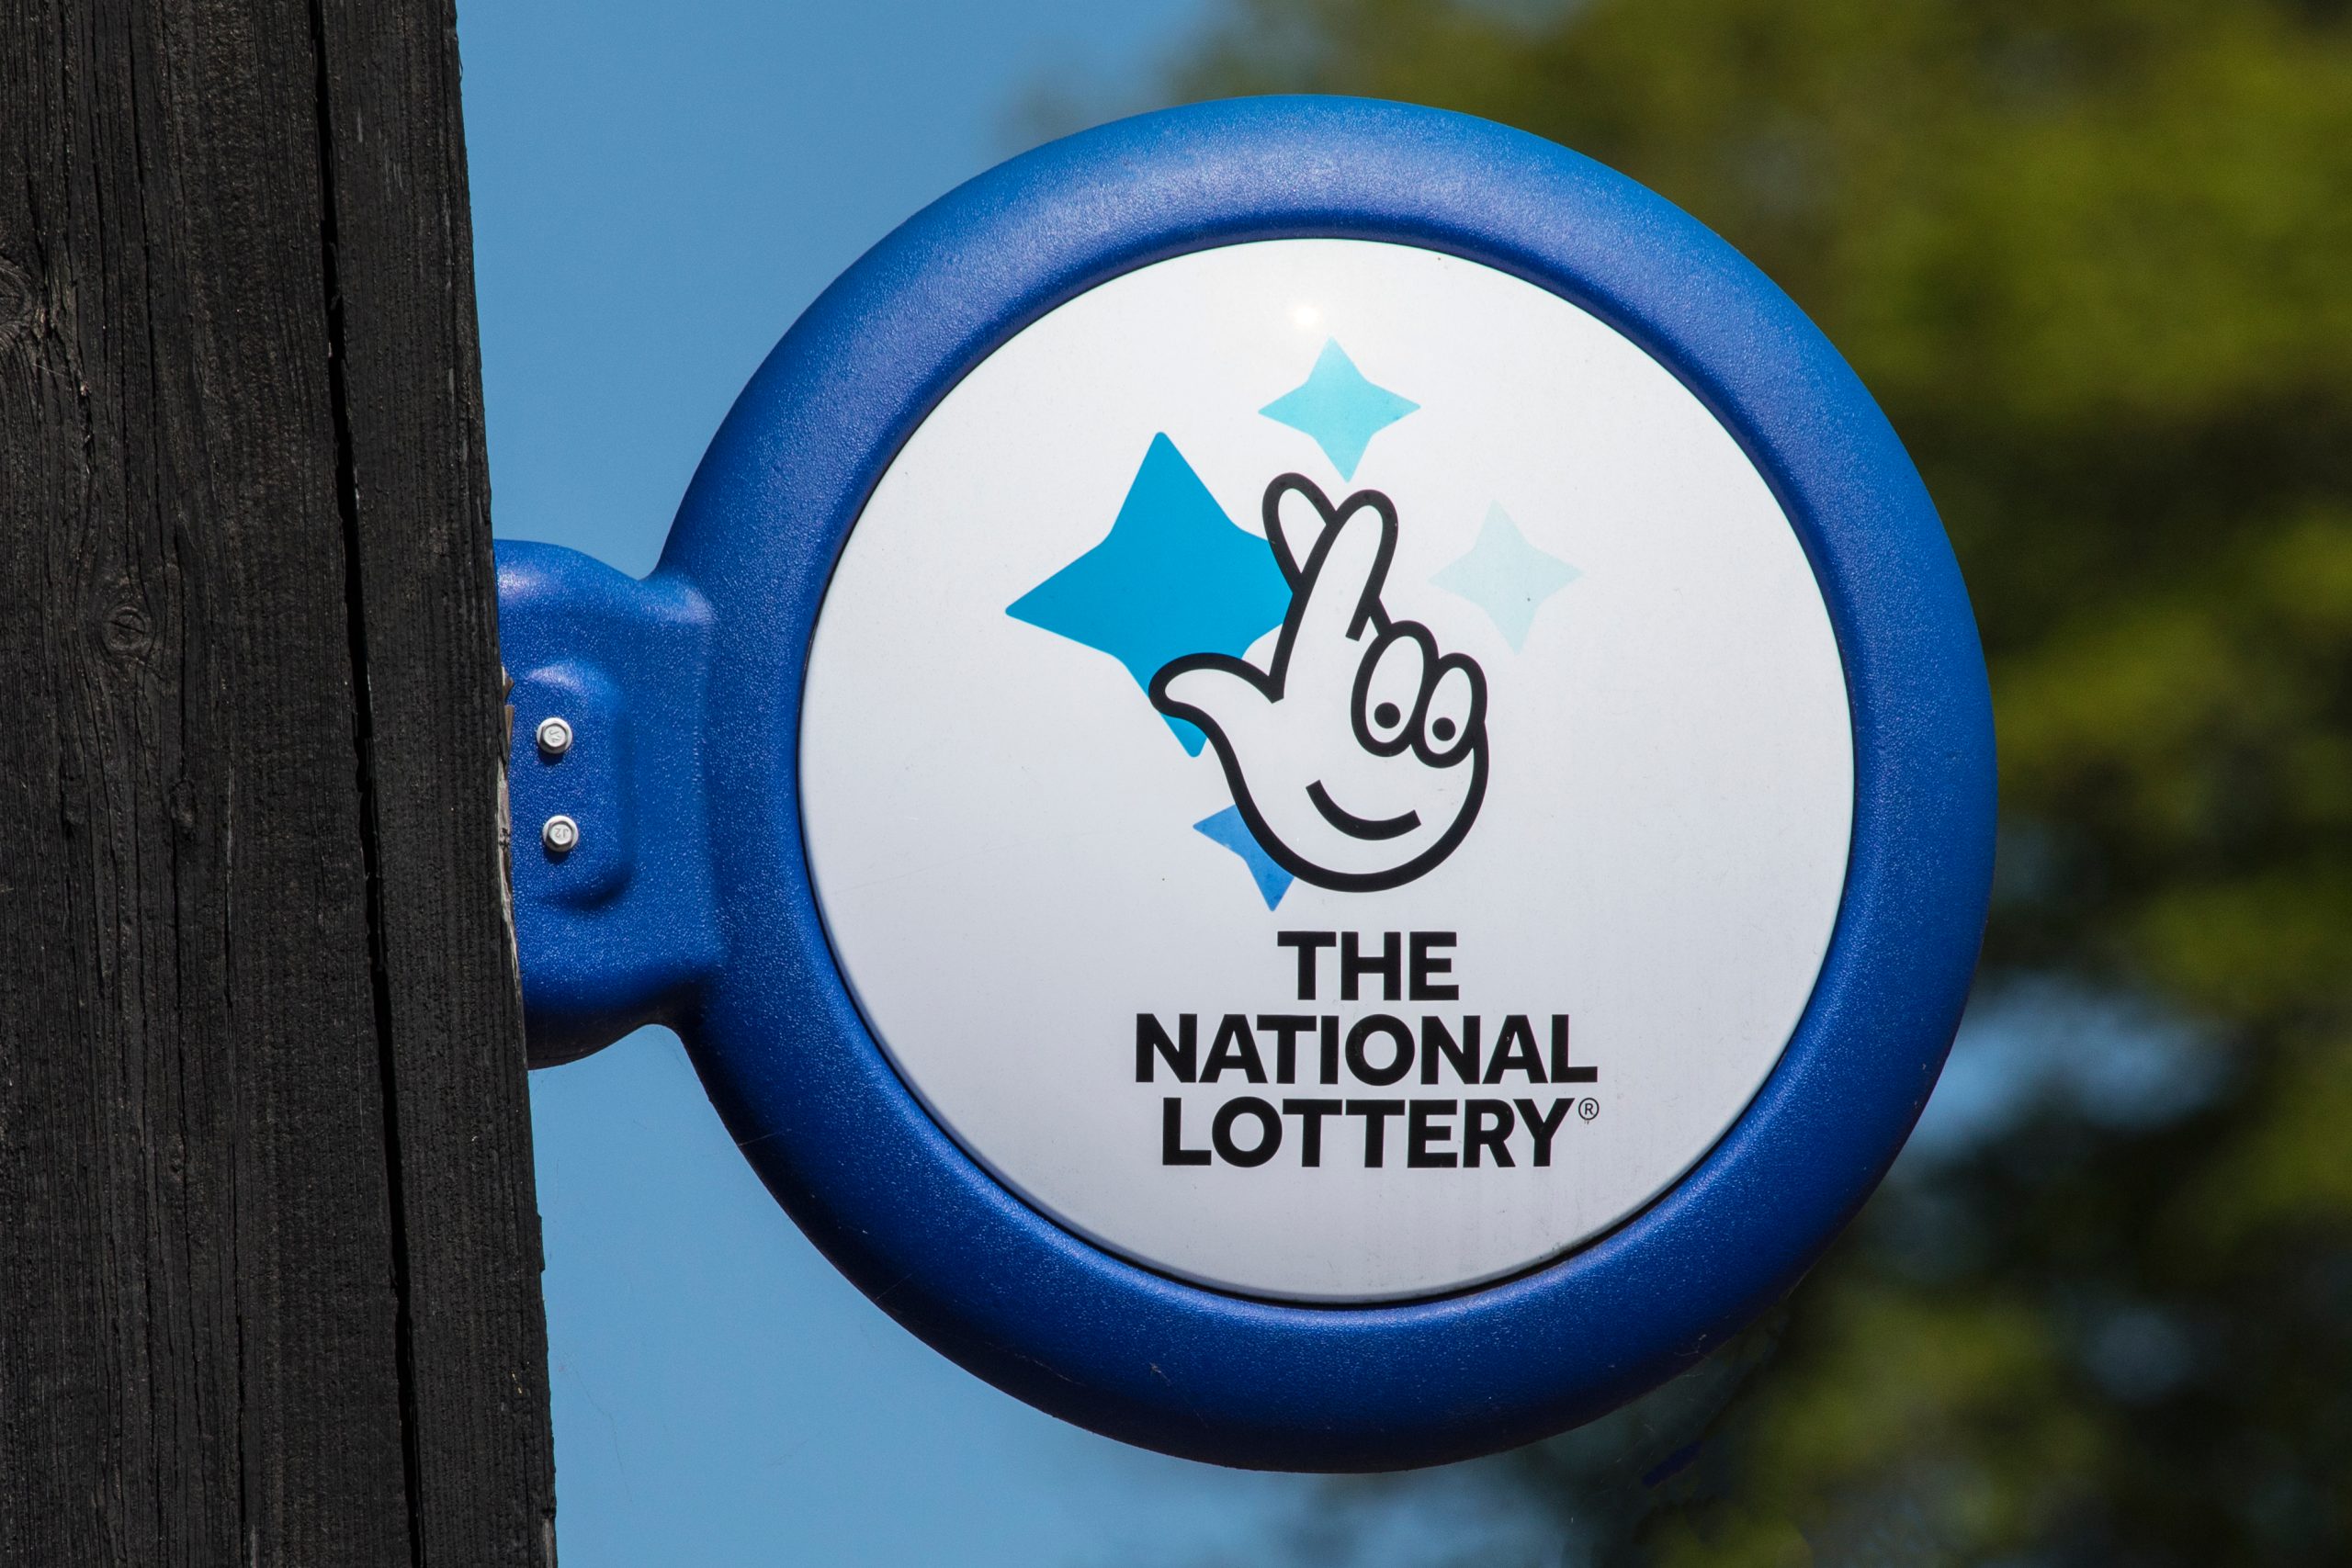 ‘Tis the season of boosted National Lottery retail sales with three mega festive draws